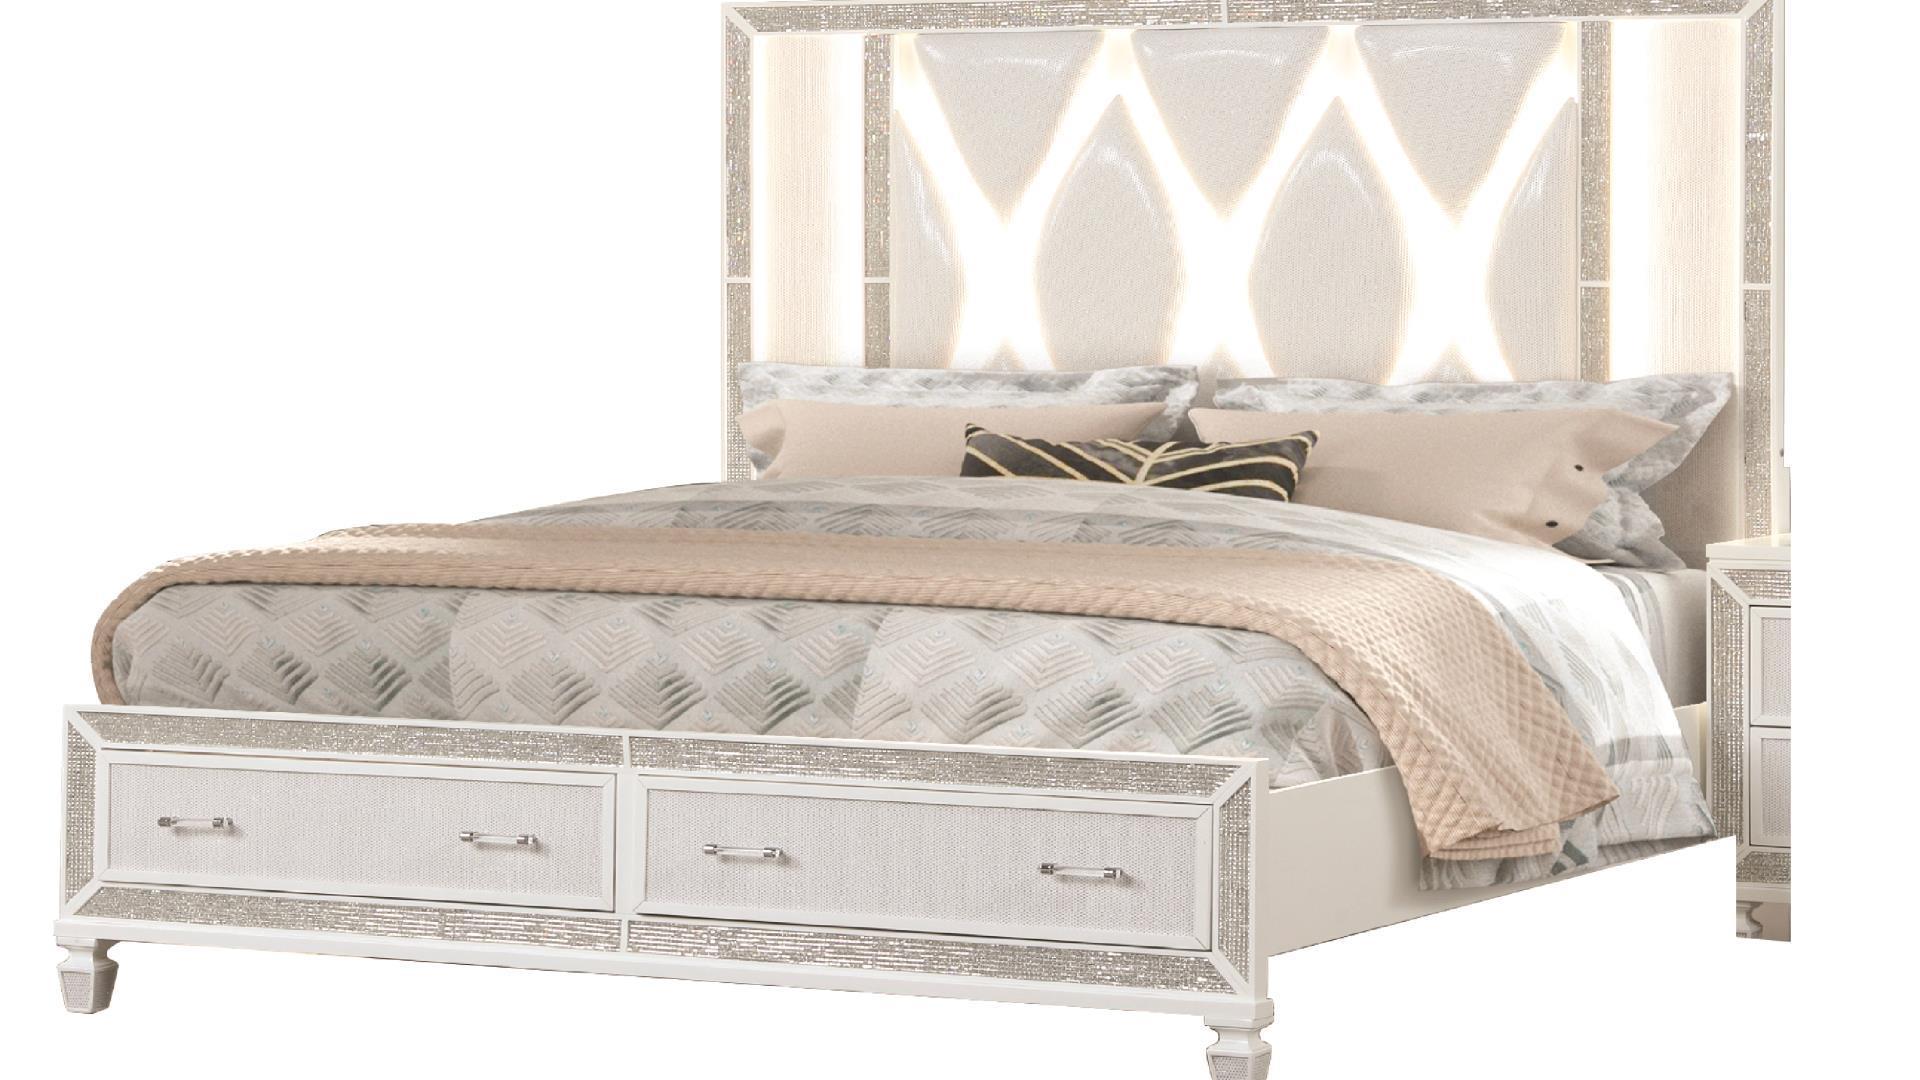 

    
Glam White Solid Wood Queen Bed Set 4Pcs CRYSTAL Galaxy Home Modern Contemporary
